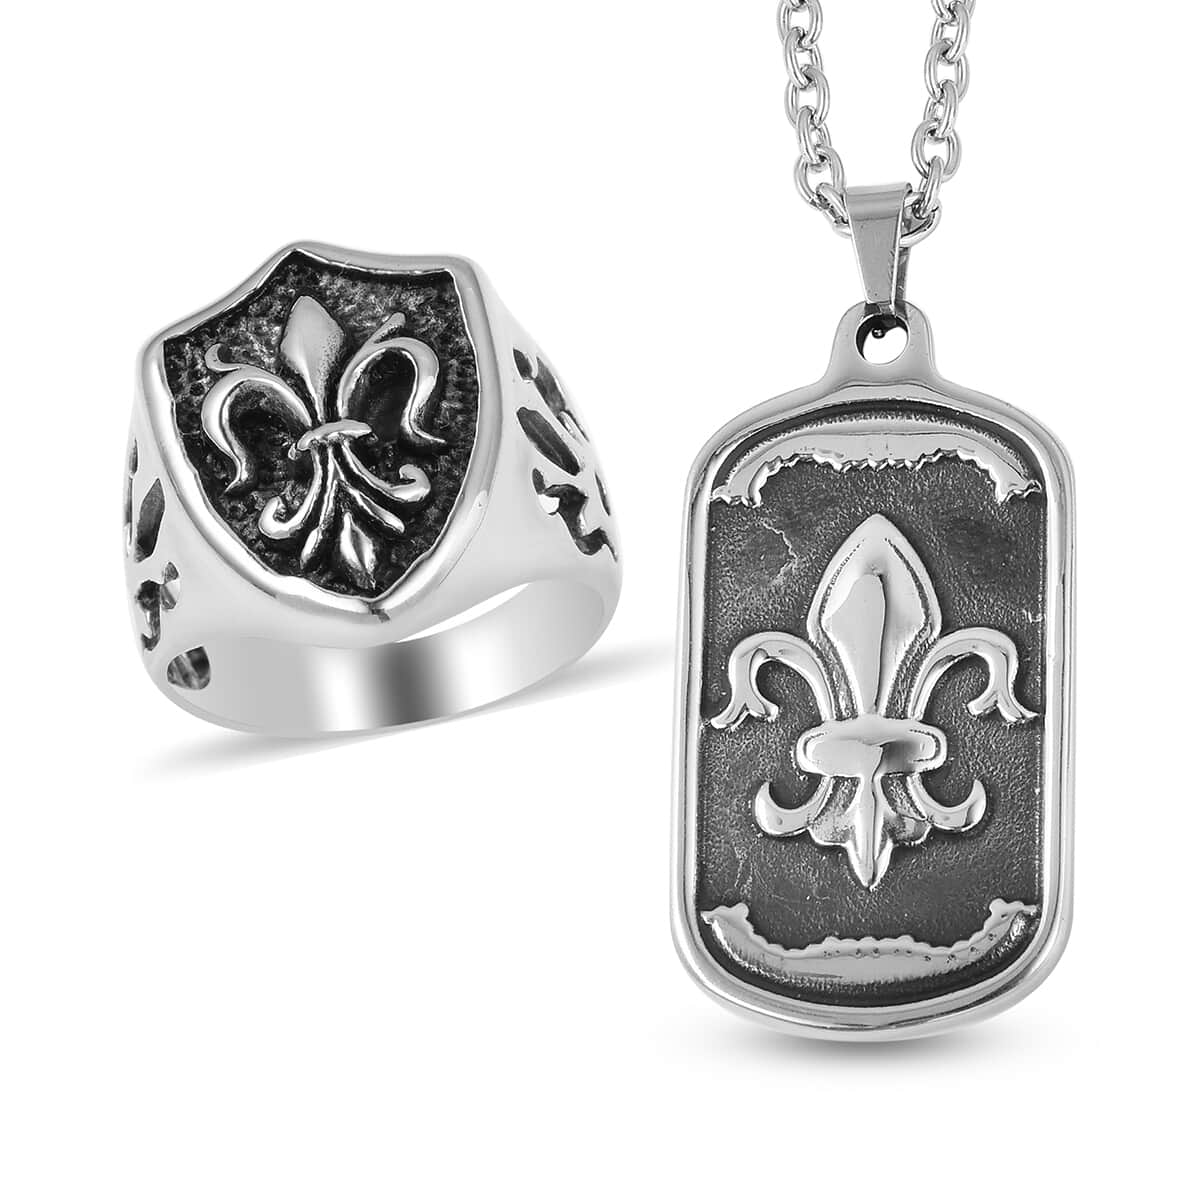 Fleur De Lis Men's Ring Size 12 and Pendant Necklace 24 Inches in Black Oxidized Stainless Steel image number 0